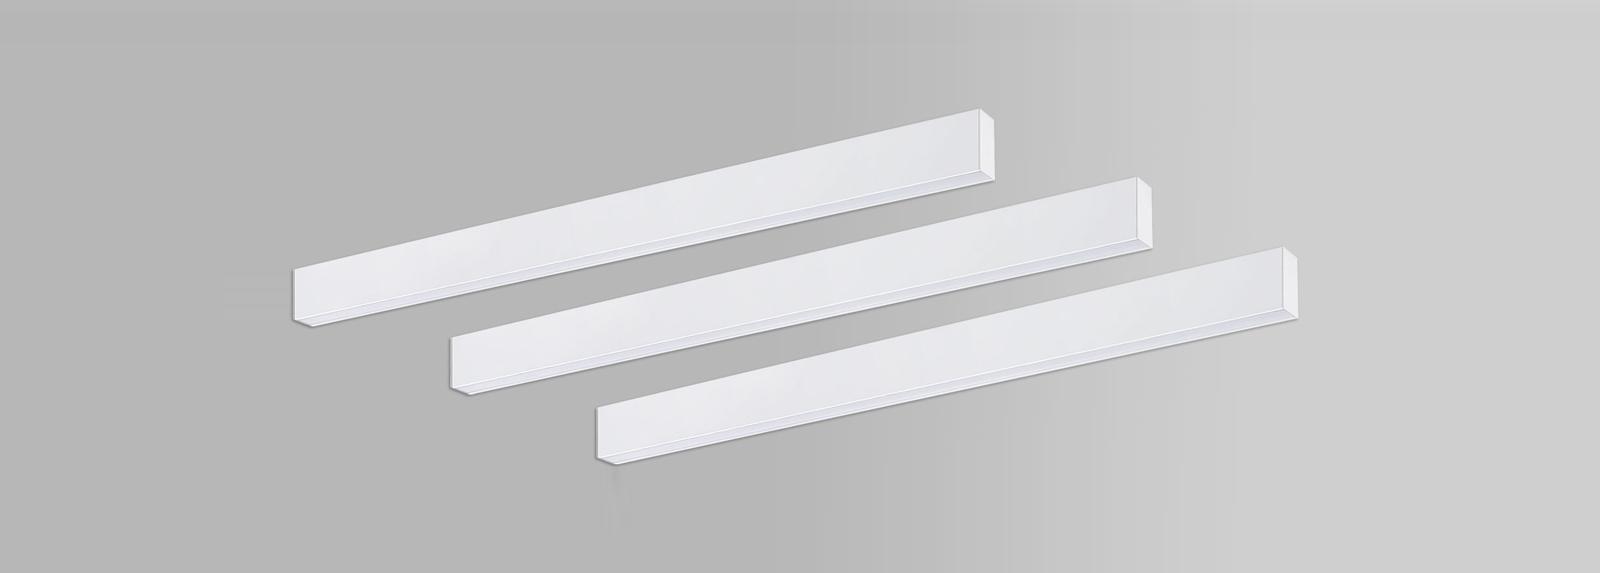 KAUTTA 700 | Two sided-emission wall-mounted linear luminaires